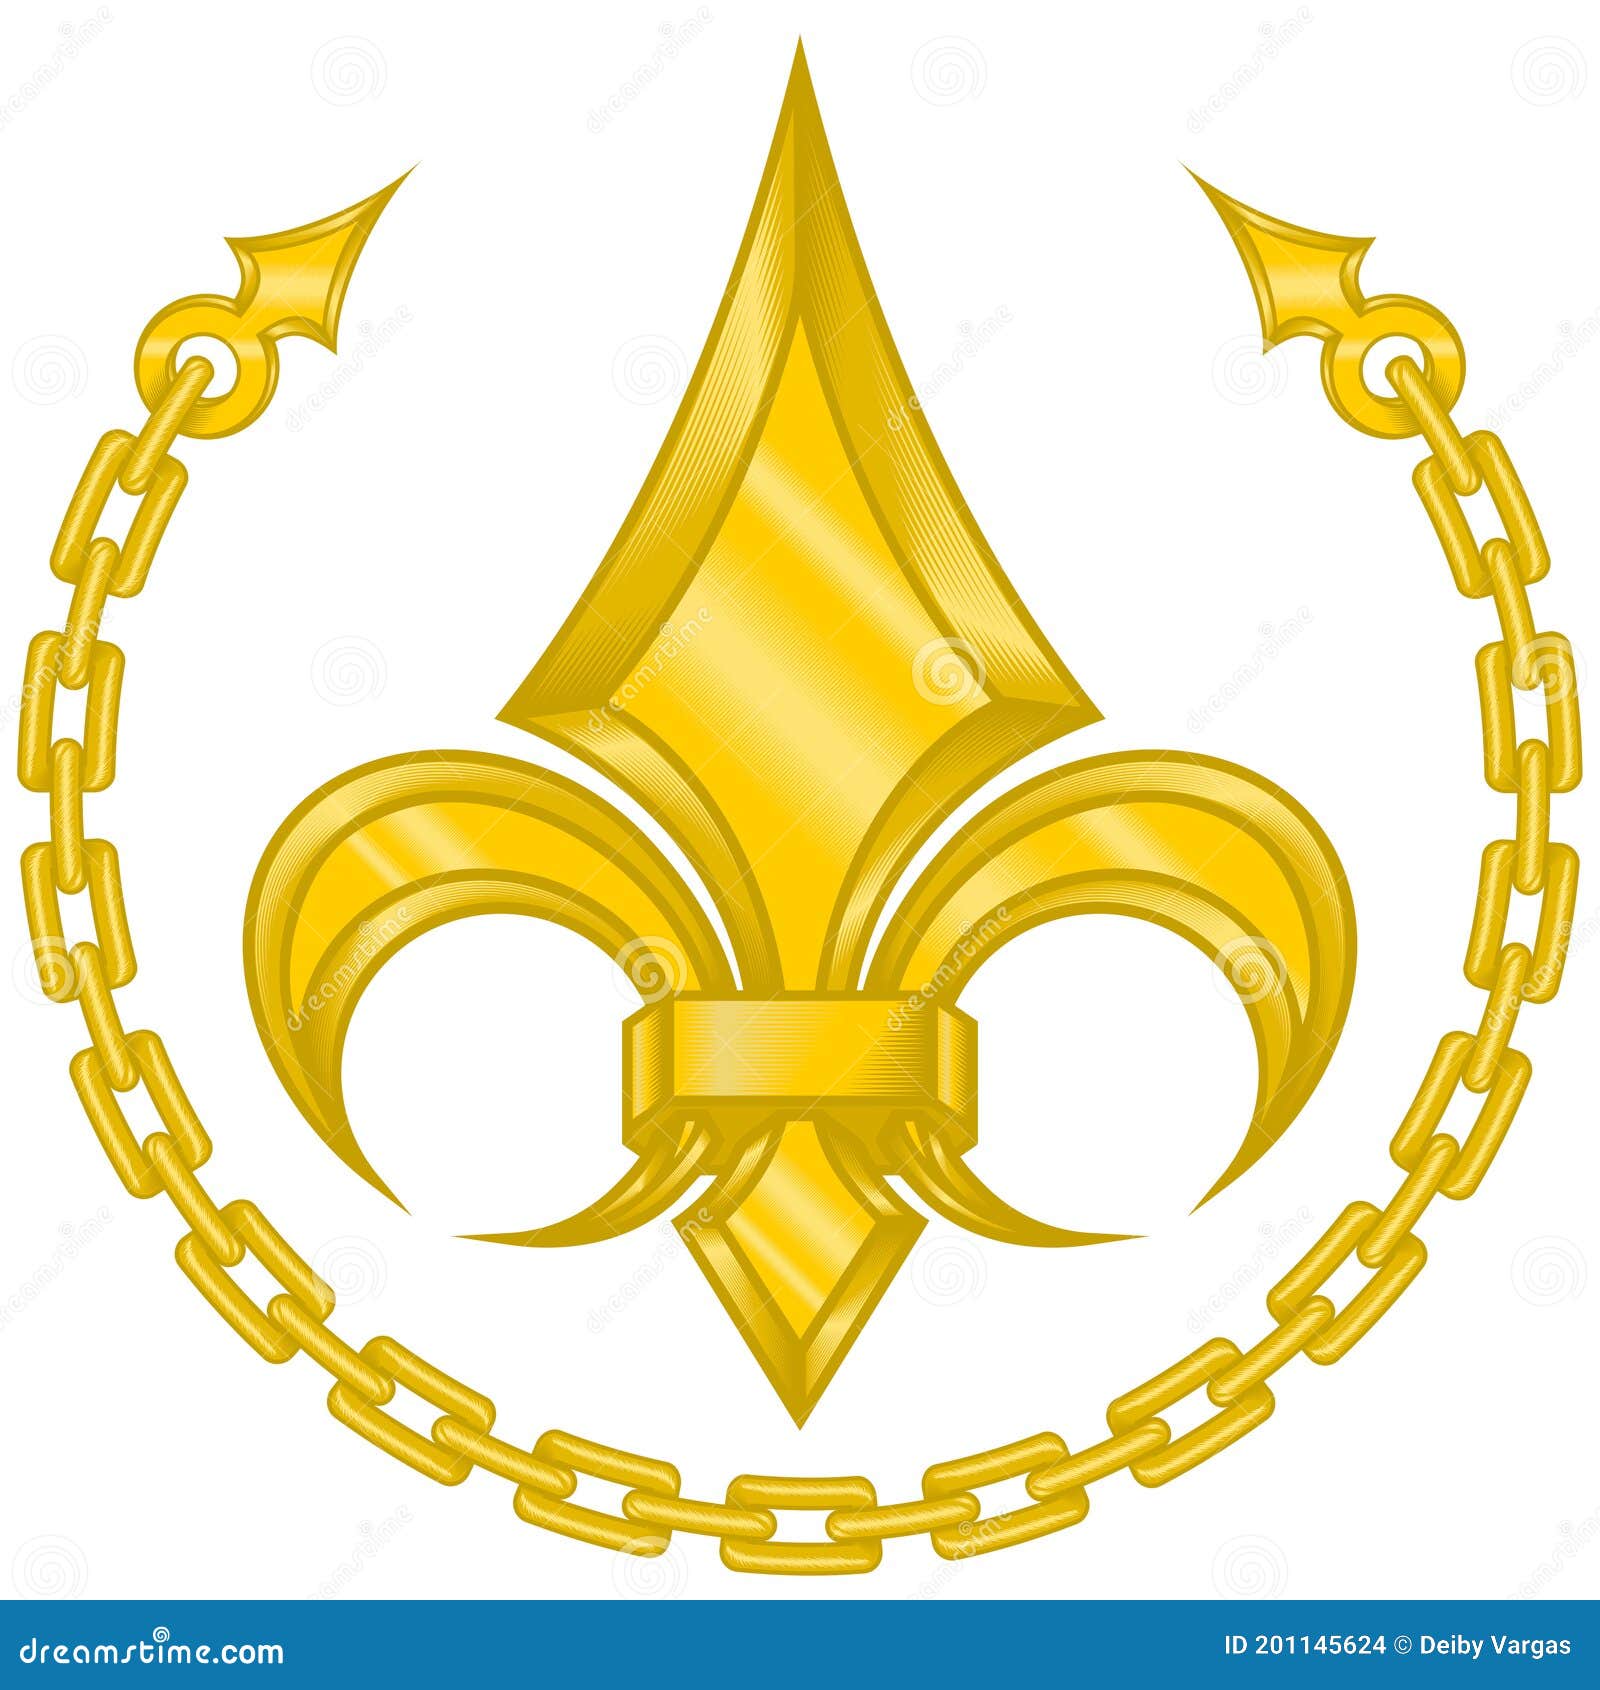   of fleur de lis in metallic style surrounded by a gold-colored chain